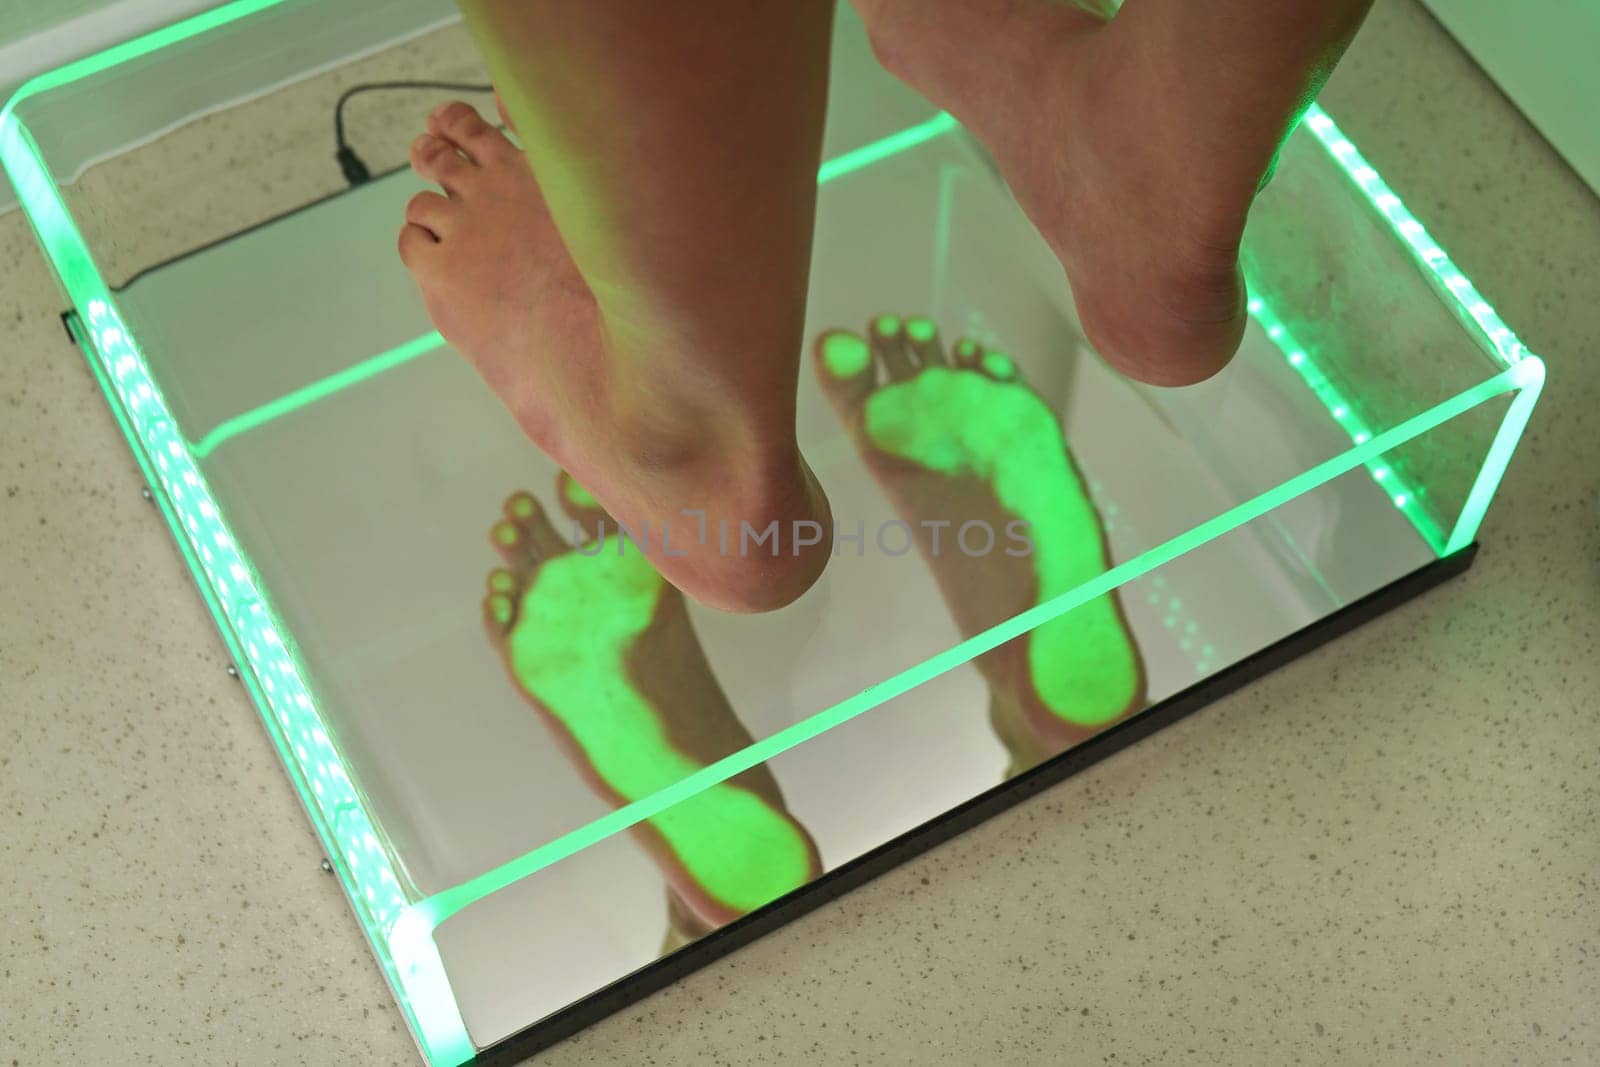 Foot step analysis on feet scanner - footprints visible in green light on plastic panel by Ivanko